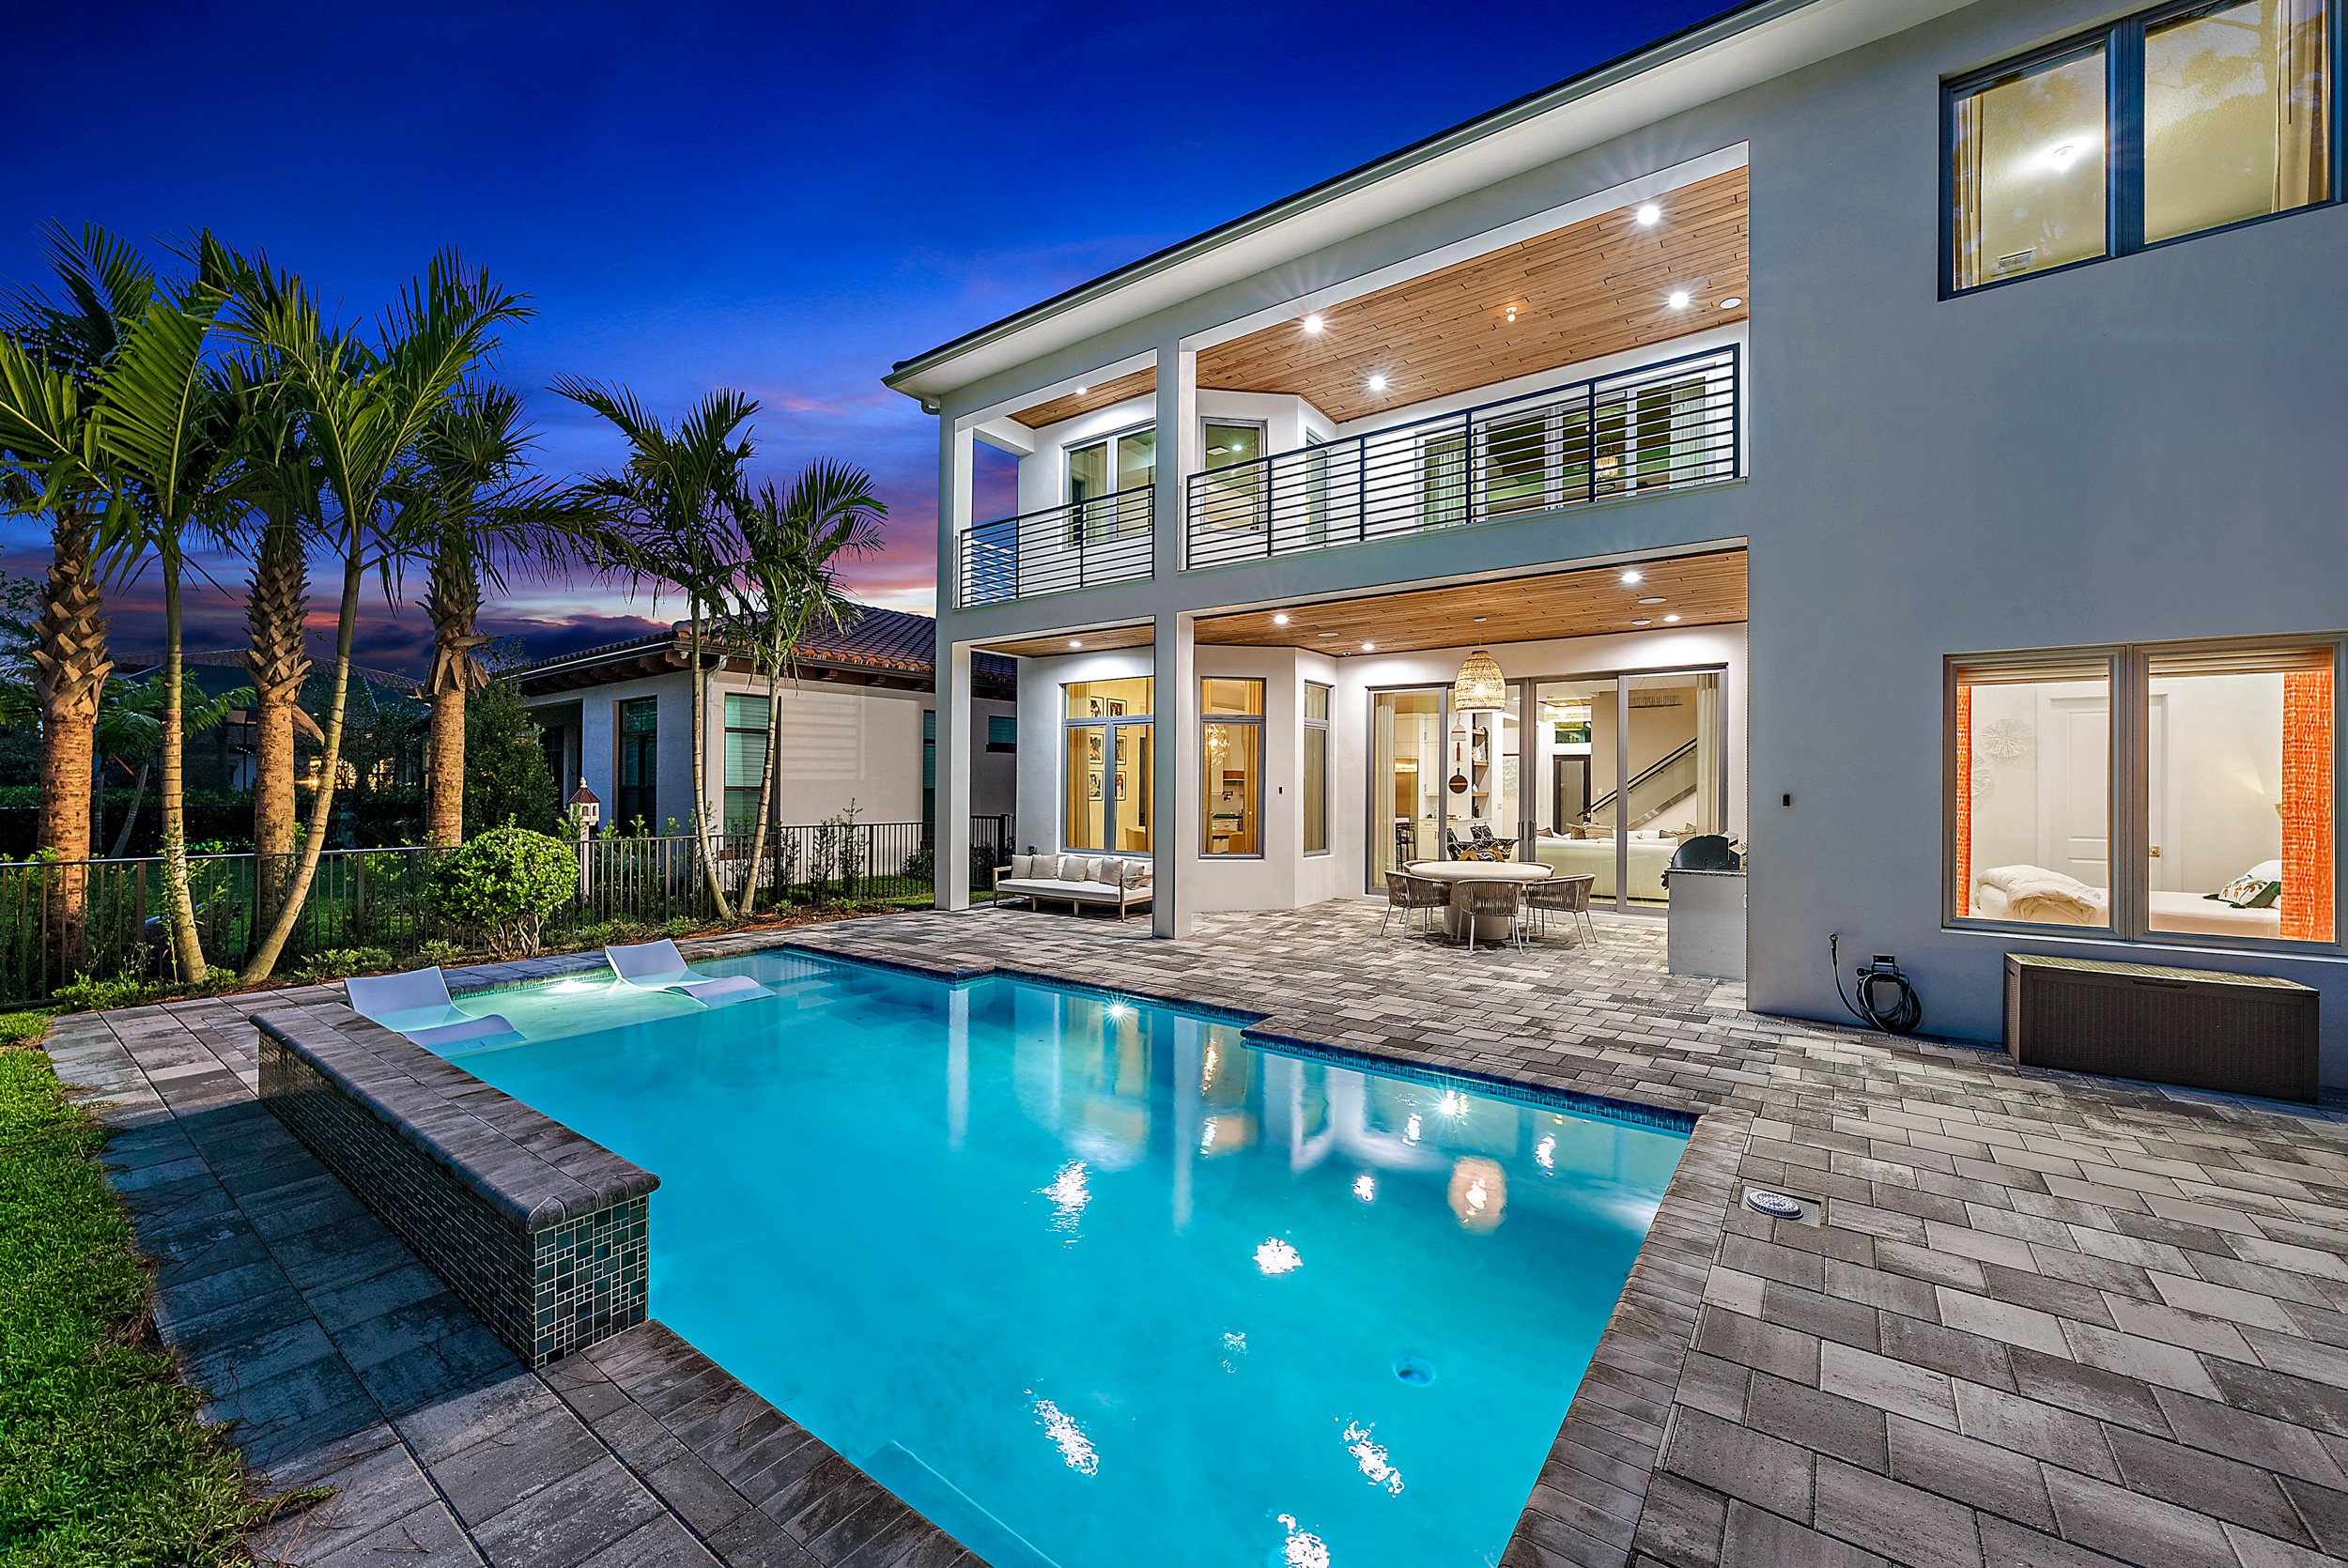  $2 million brand new construction pool home in the gated and family friendly community of alton in palm beach gardens with luxury amenities and top of the line upgrades and appliances 